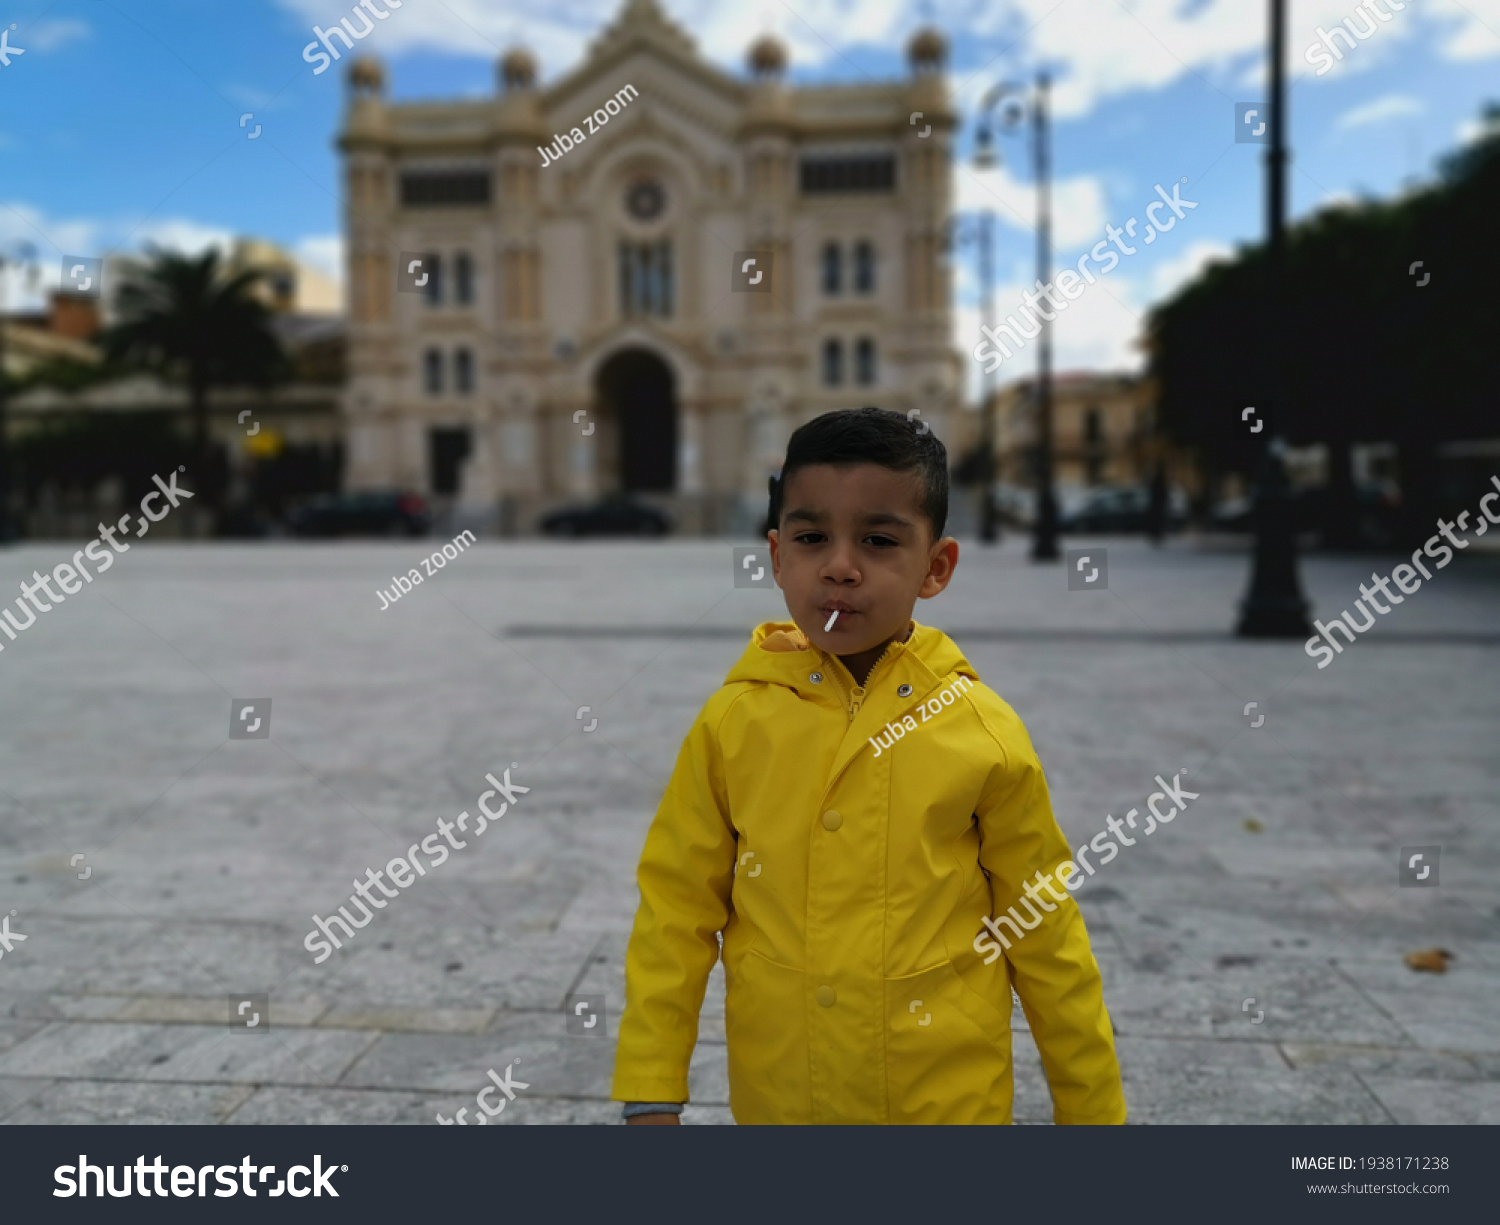 Stock Photo A Child Playing With A Lollipop In His Mouth 1938171238 